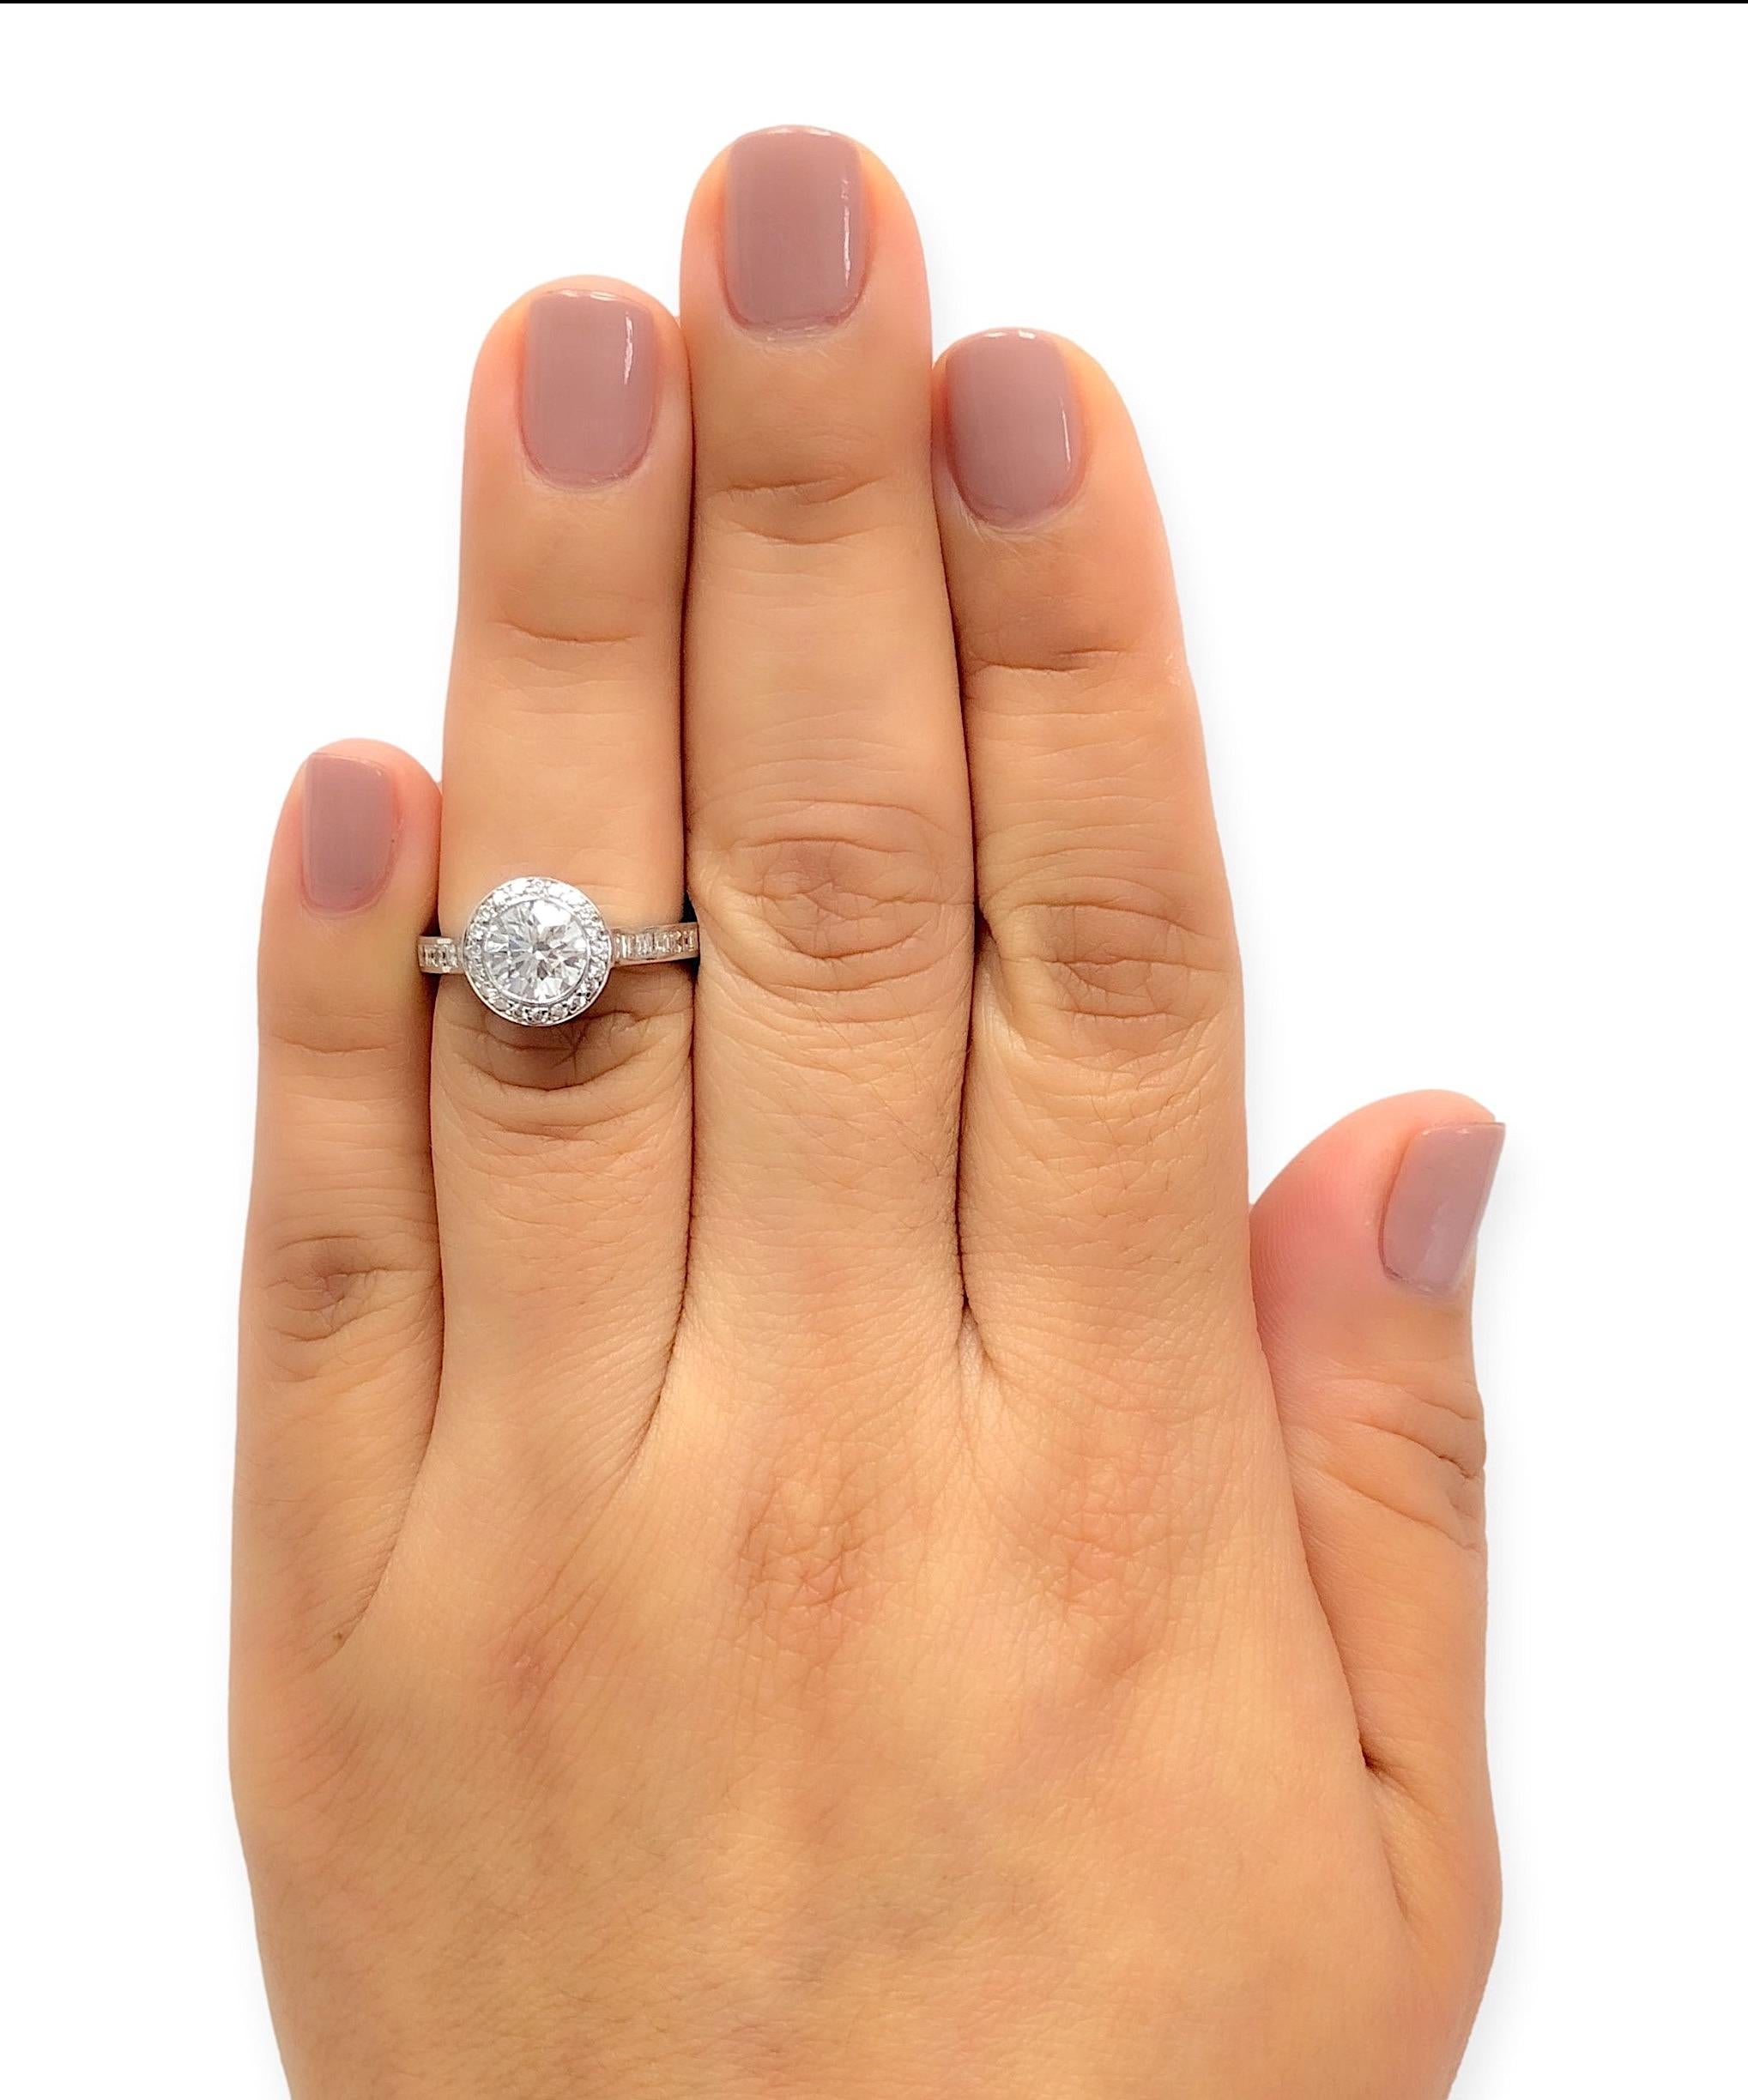 Tiffany & Co. Embrace Platinum Halo Round Diamond Engagement Ring 1.07ct GVVS1 In Excellent Condition For Sale In New York, NY